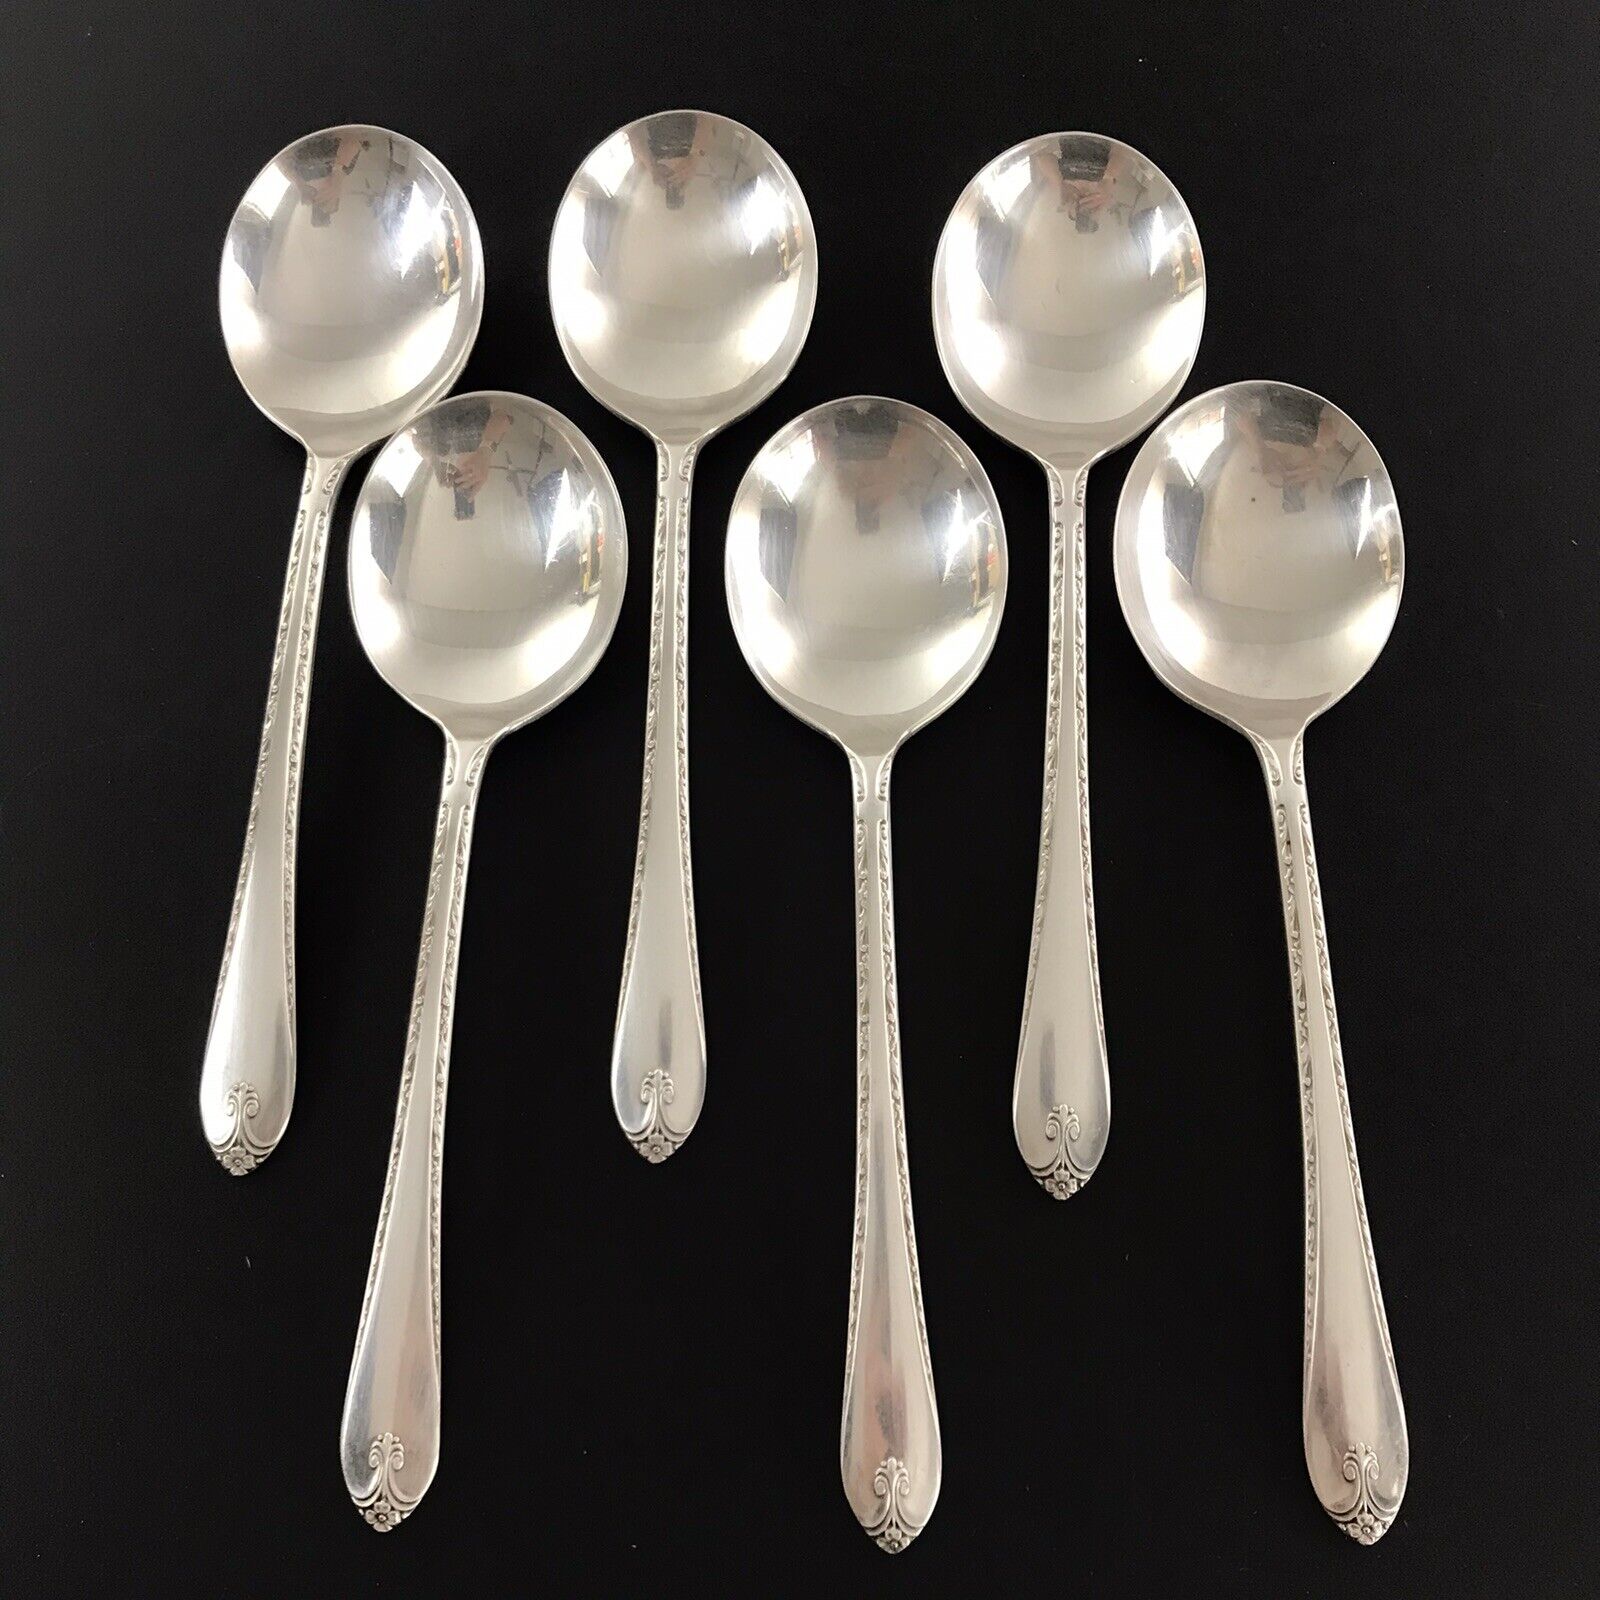 6 EXQUISITE Wm Rogers & Son IS Silverplate Flatware Soup Gumbo Tablespoons 1940